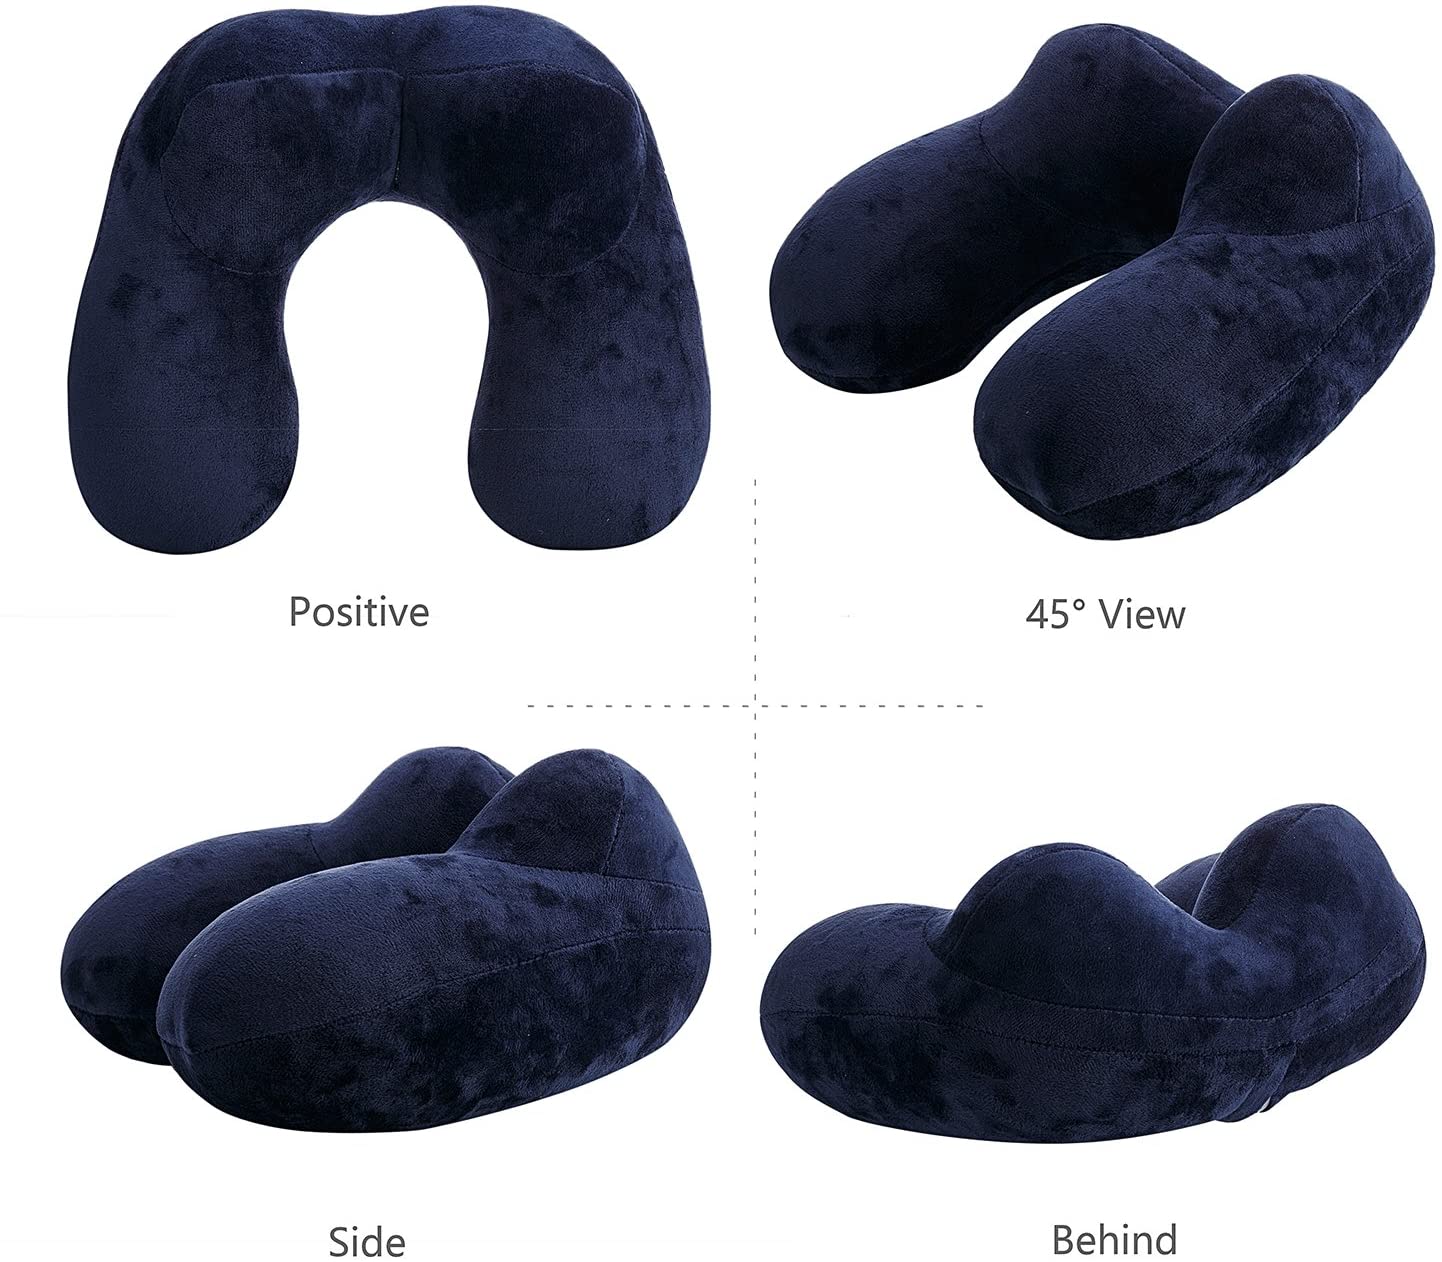 LUZWAY Inflatable Neck Pillow Kit with Soft Velvet Pillowcase, Ear Plugs, and Eye Mask - Perfect for Kids, Airplane, Car, and Train Sleeping 2